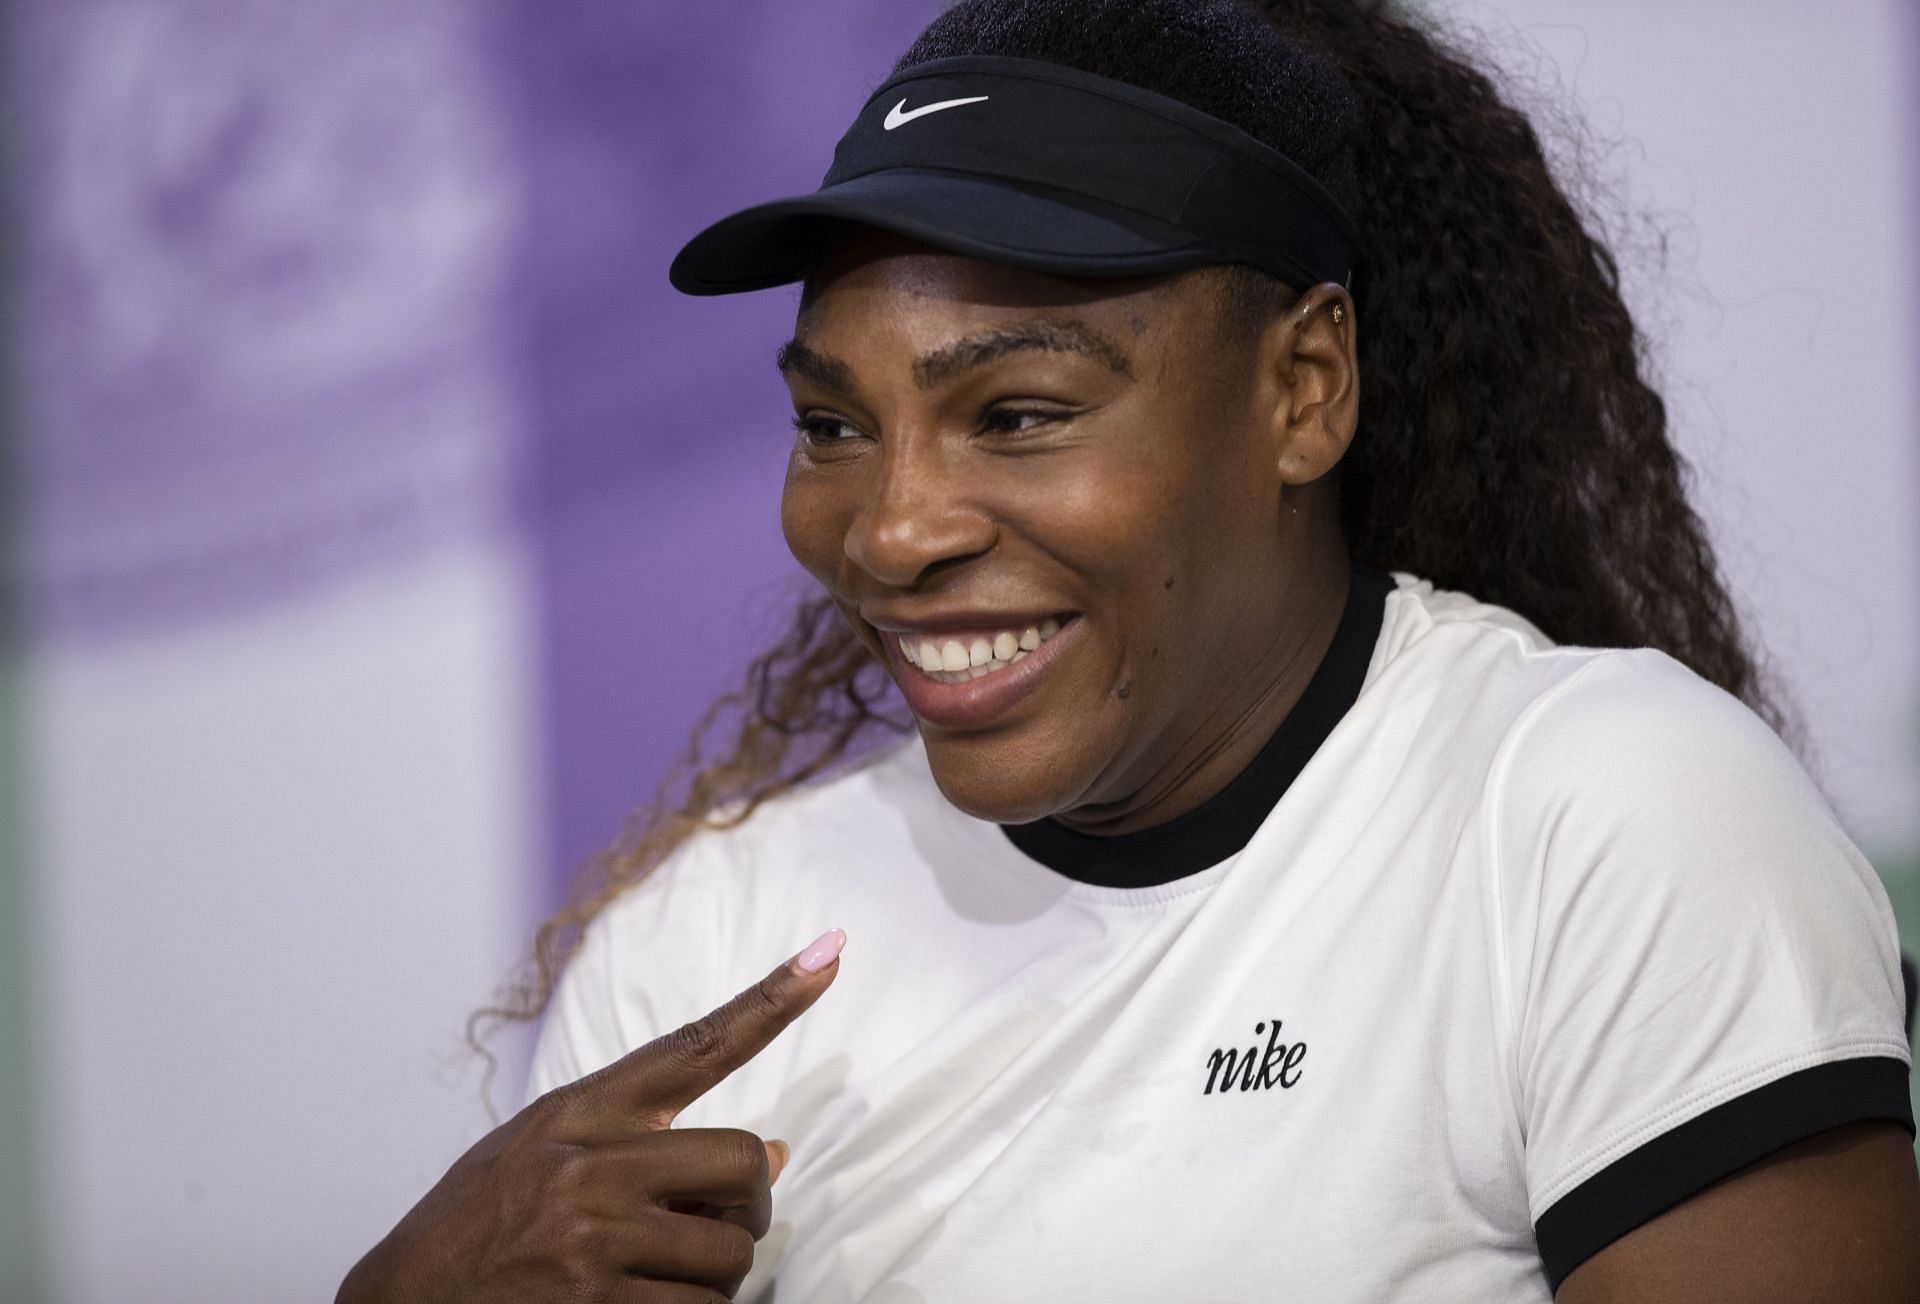 Serena Williams jokes about potential baby names for her second child